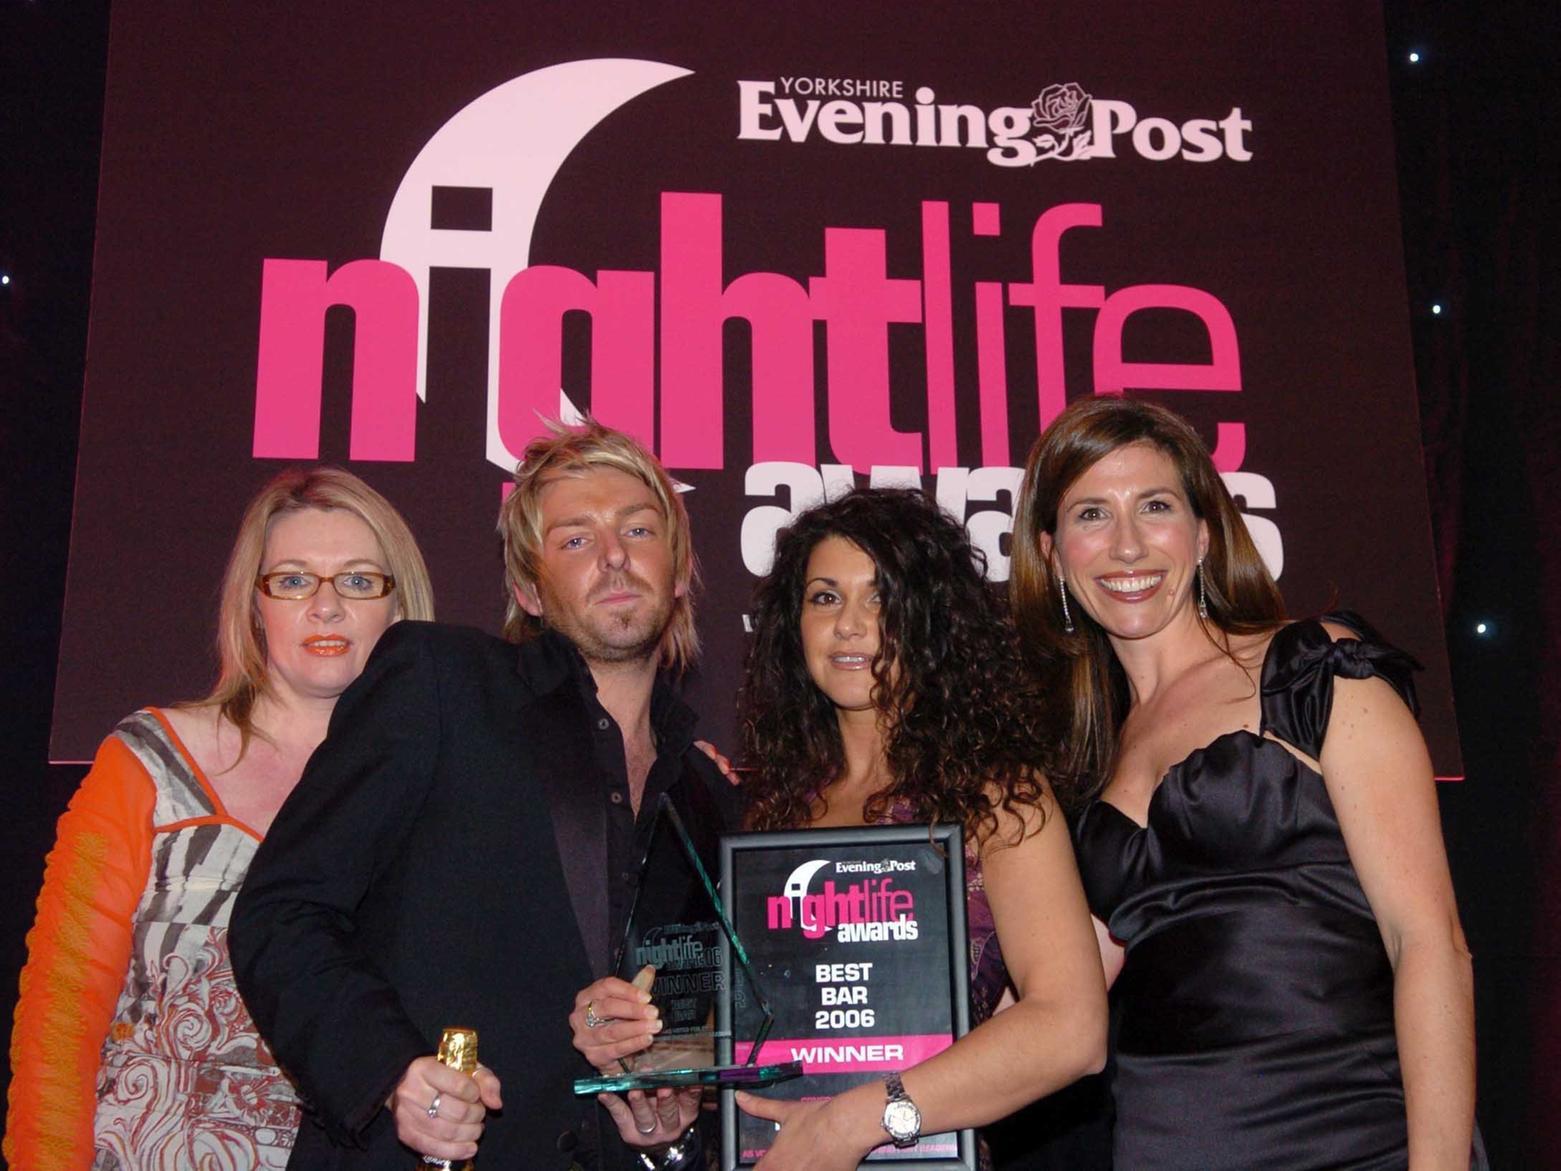 Oracle scooped the 'Best Bar' category at the Yorkshire Evening Post Nightlife Awards in February 2007.